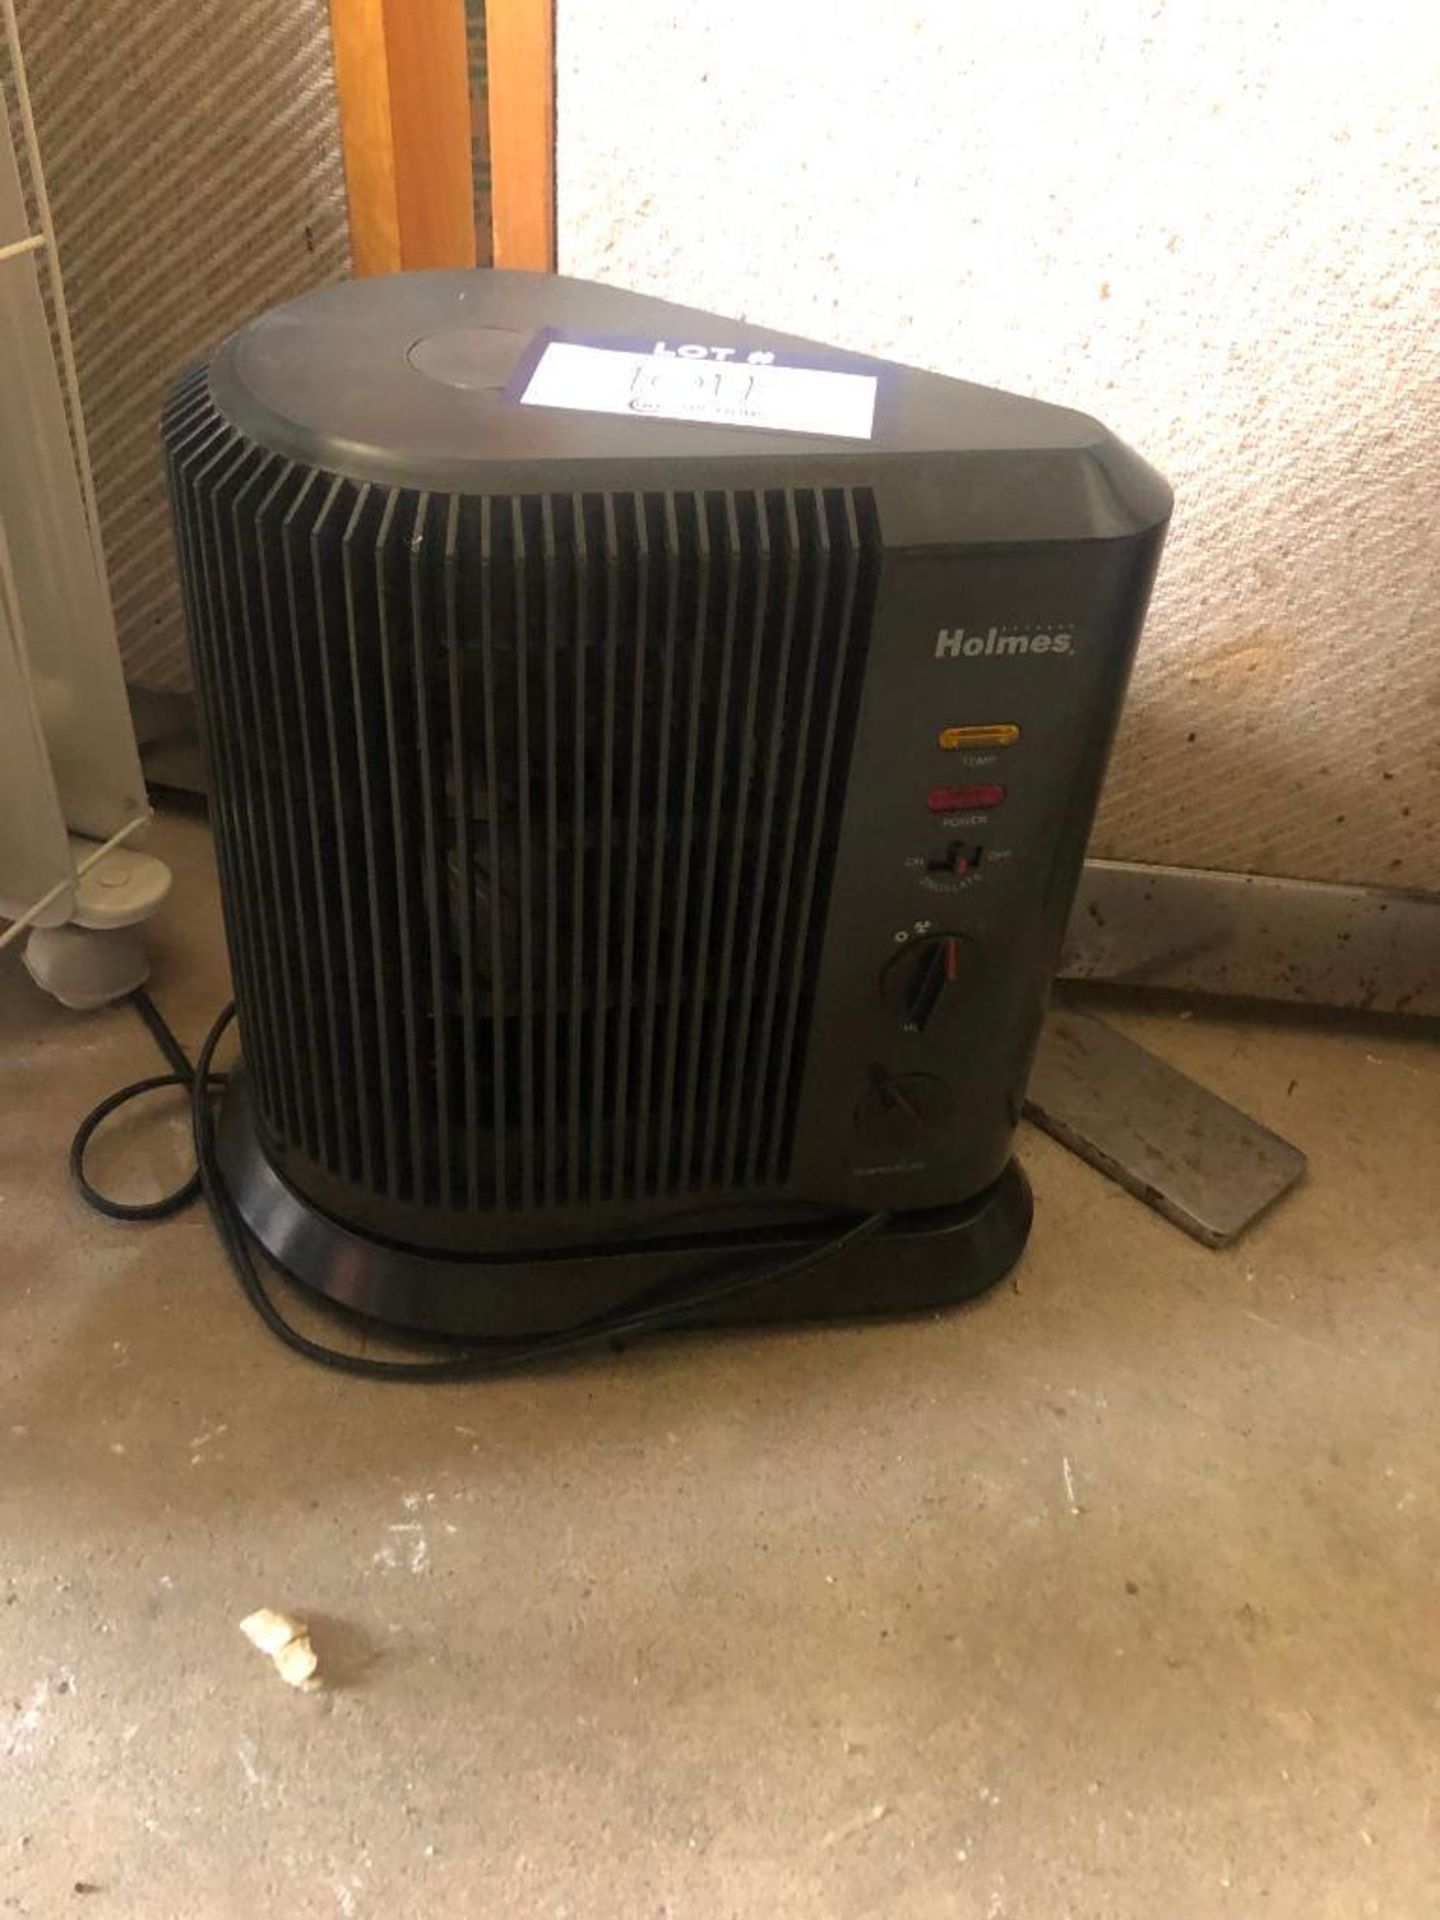 Holmes Electric Portable Heater